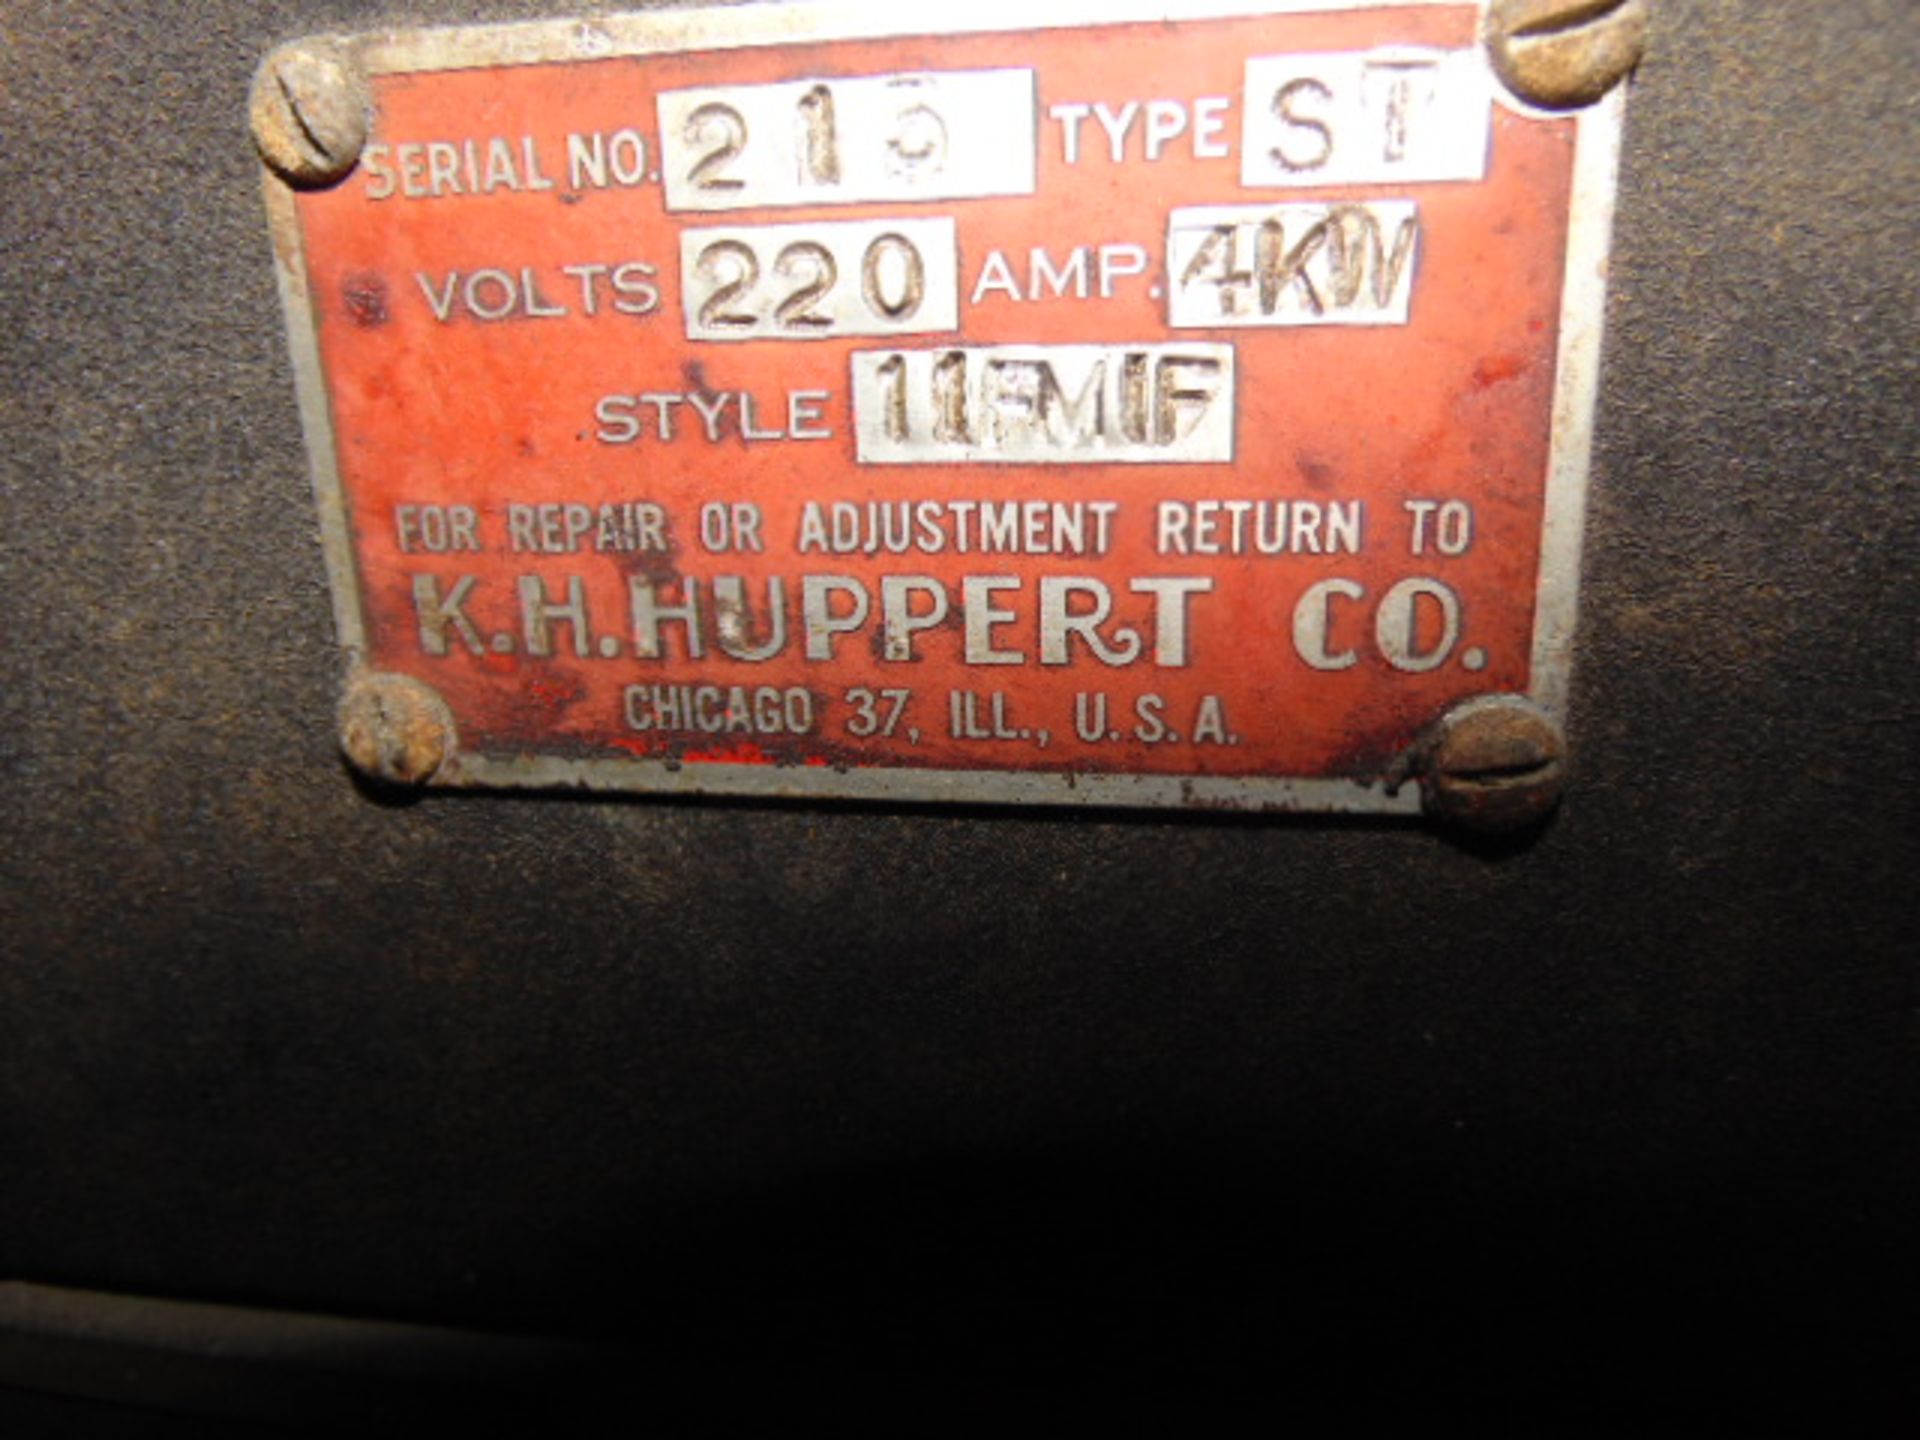 FURNACE, HUPPERT 8 X 8 X 12” CAP., Type ST, electric fired, S/N 215 - Image 2 of 2